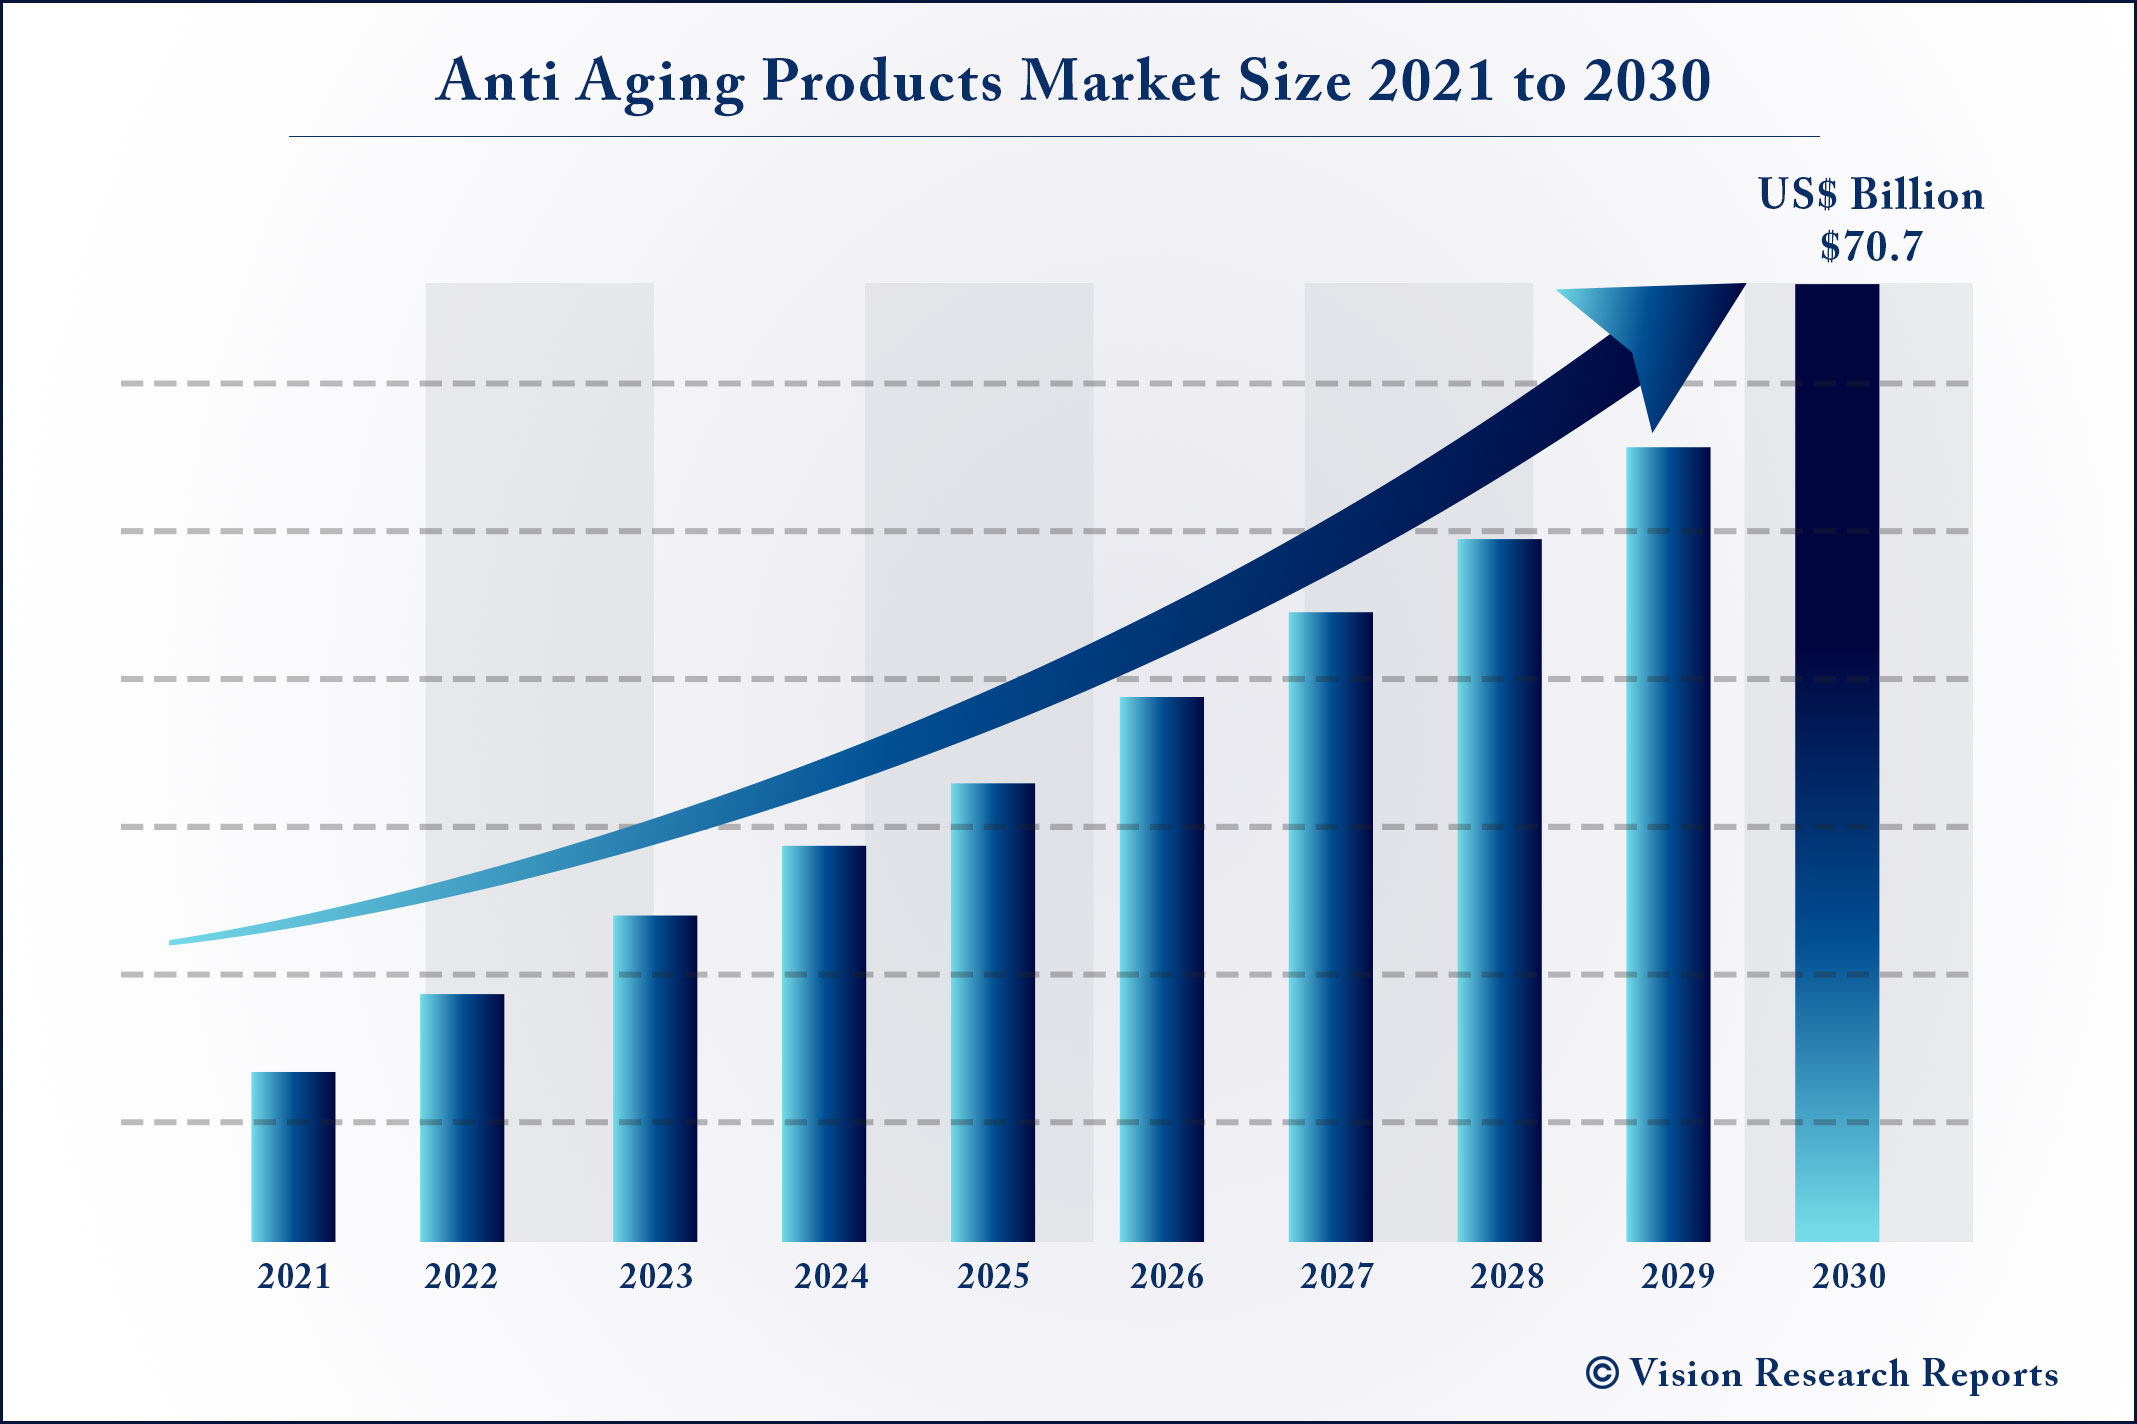 Anti Aging Products Market Size 2021 to 2030